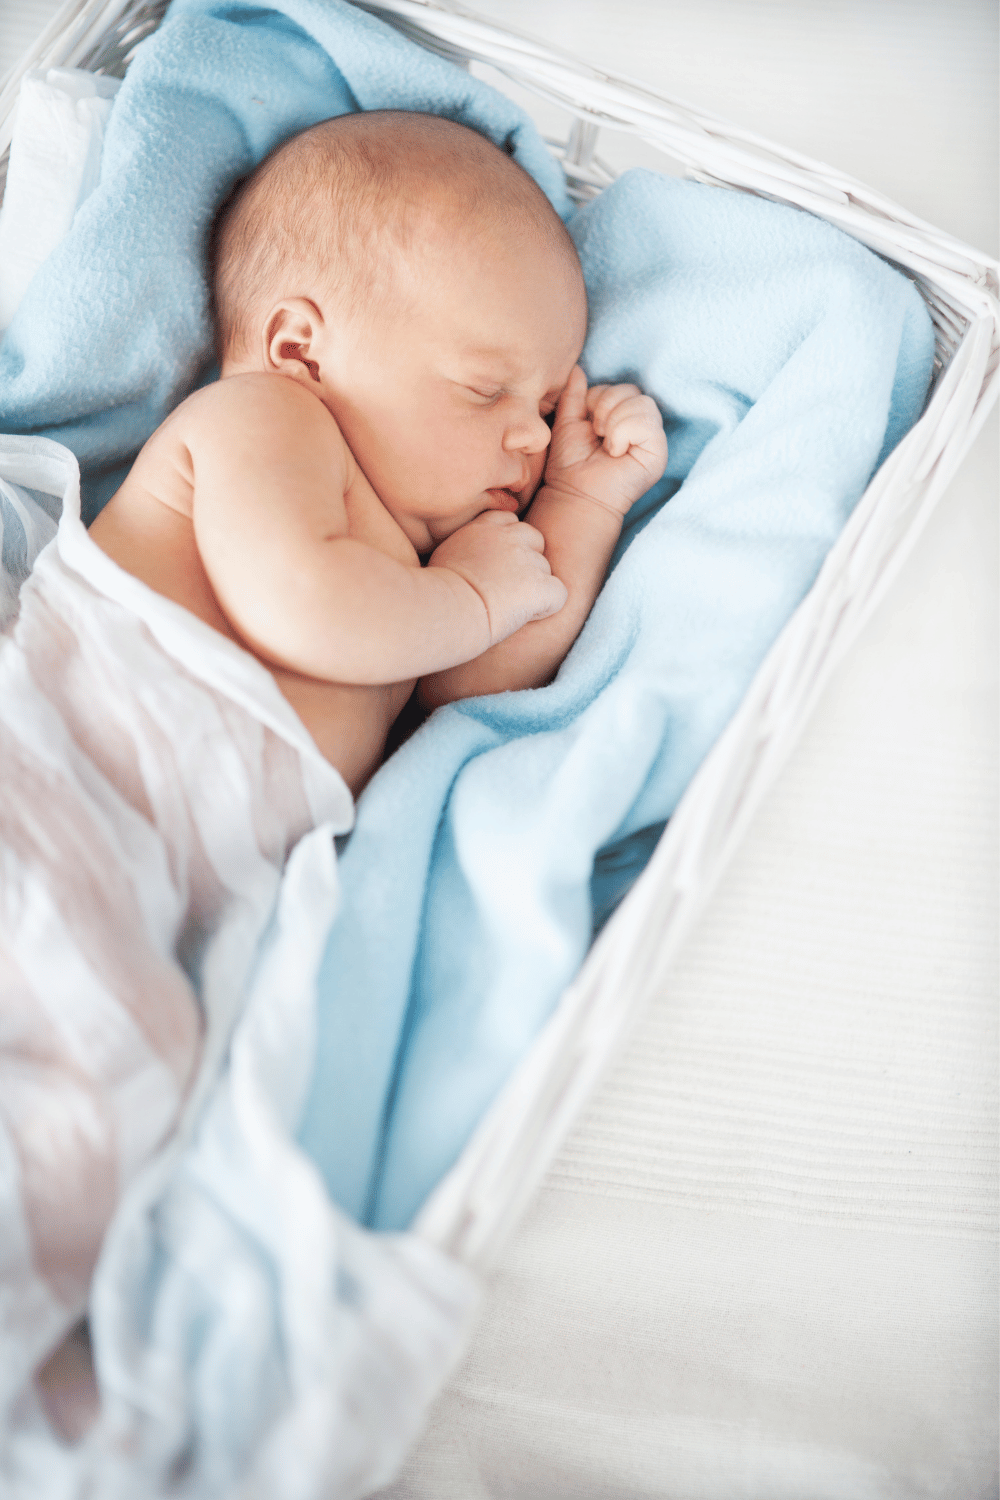 Ways to Make Your Home Cozier and Safer for Your Newborn